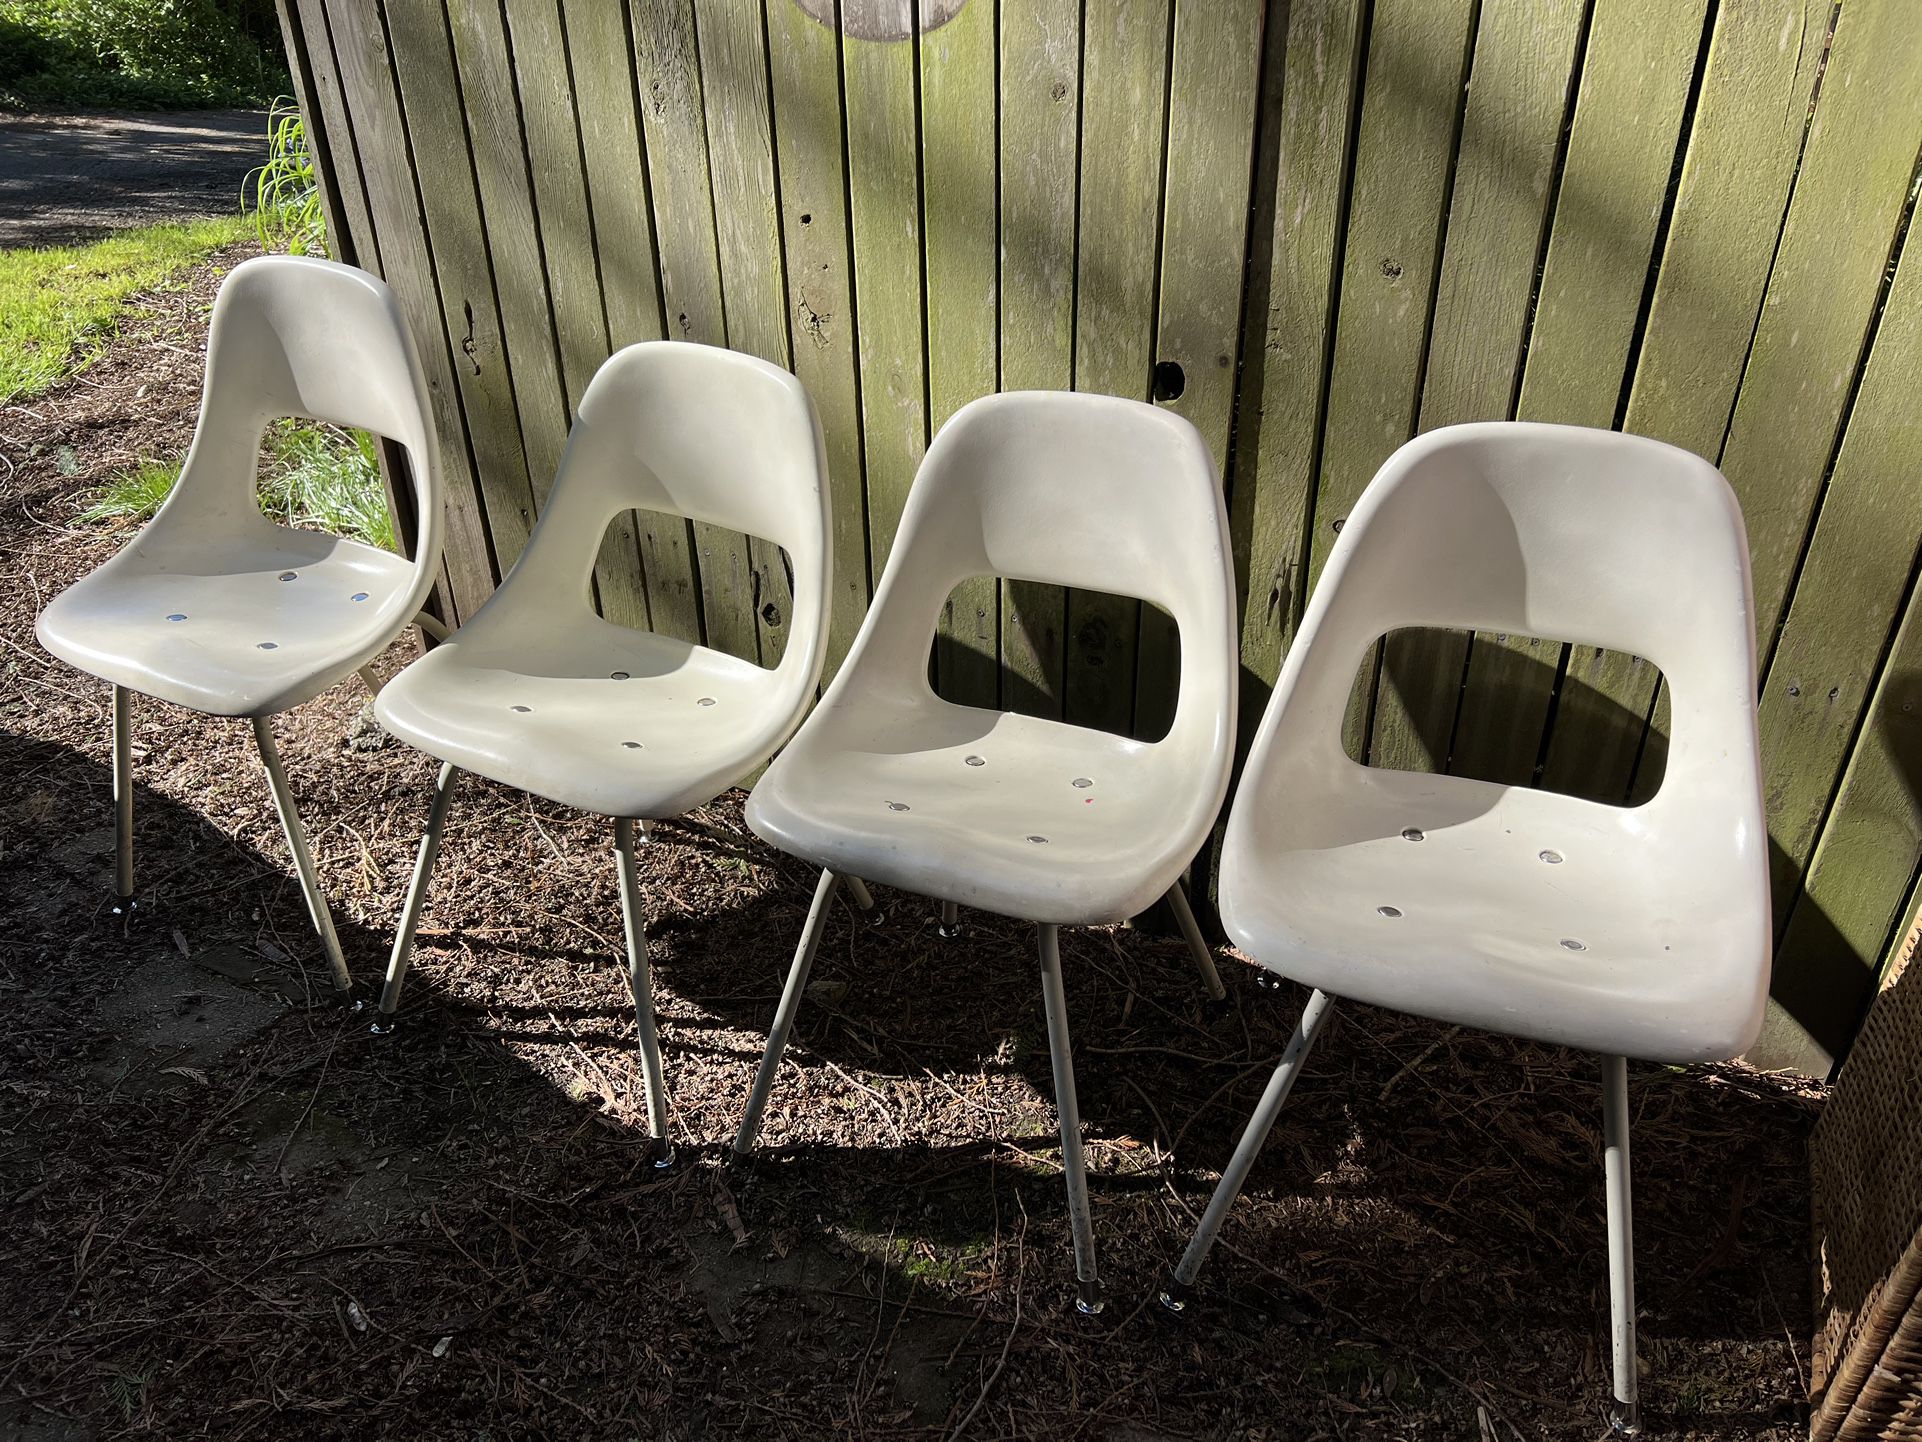 Retro Mod Molded Chairs